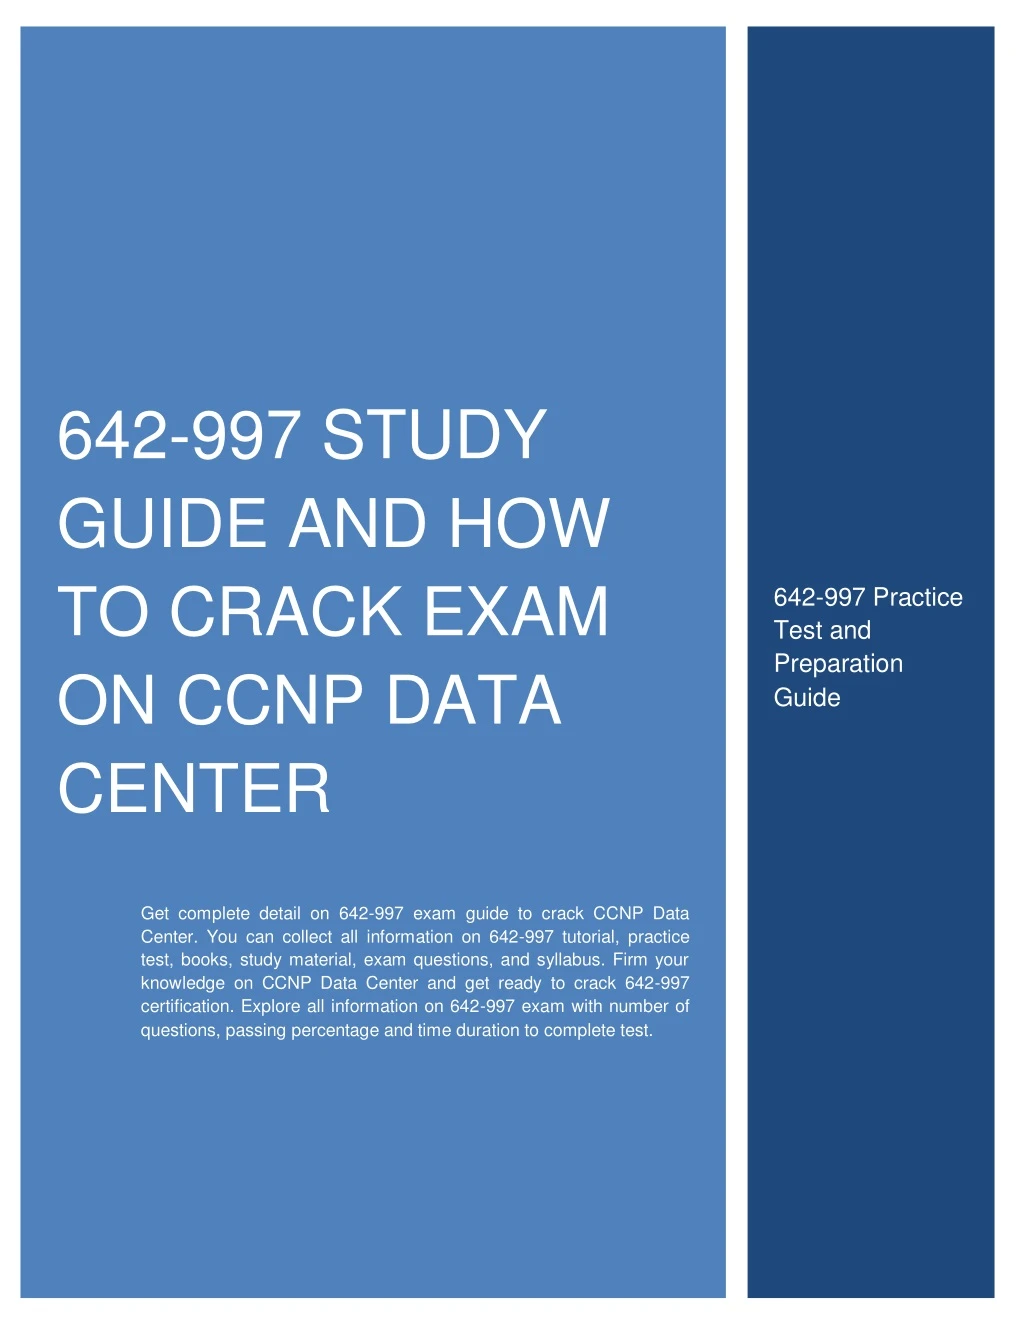 642 997 study guide and how to crack exam on ccnp